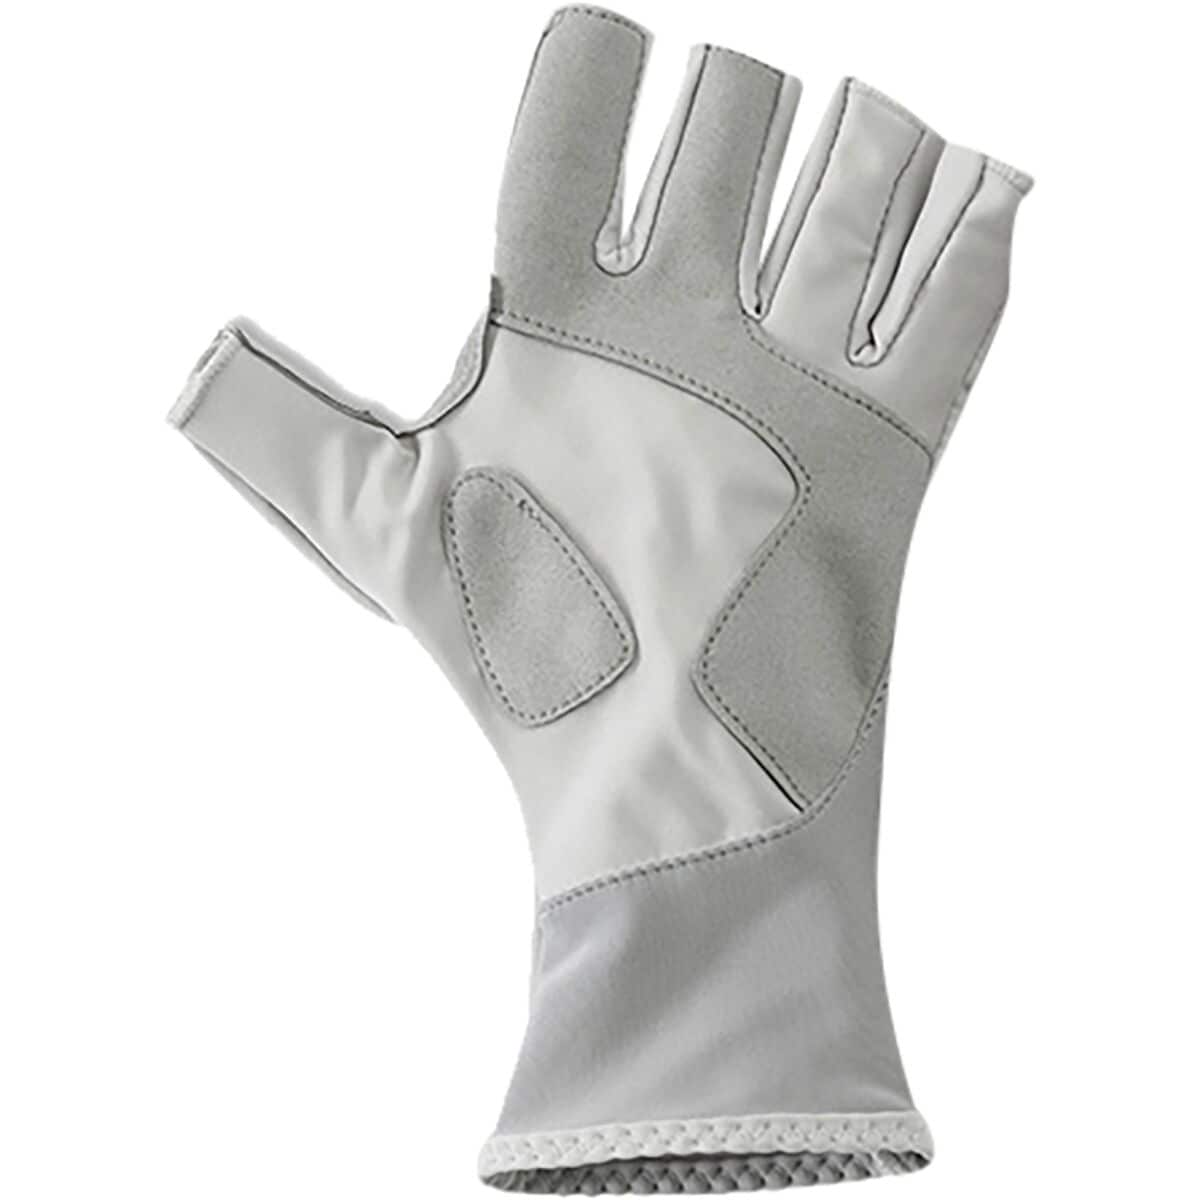 Light Grey Med NEW FREE SHIPPING Orvis Sunglove 